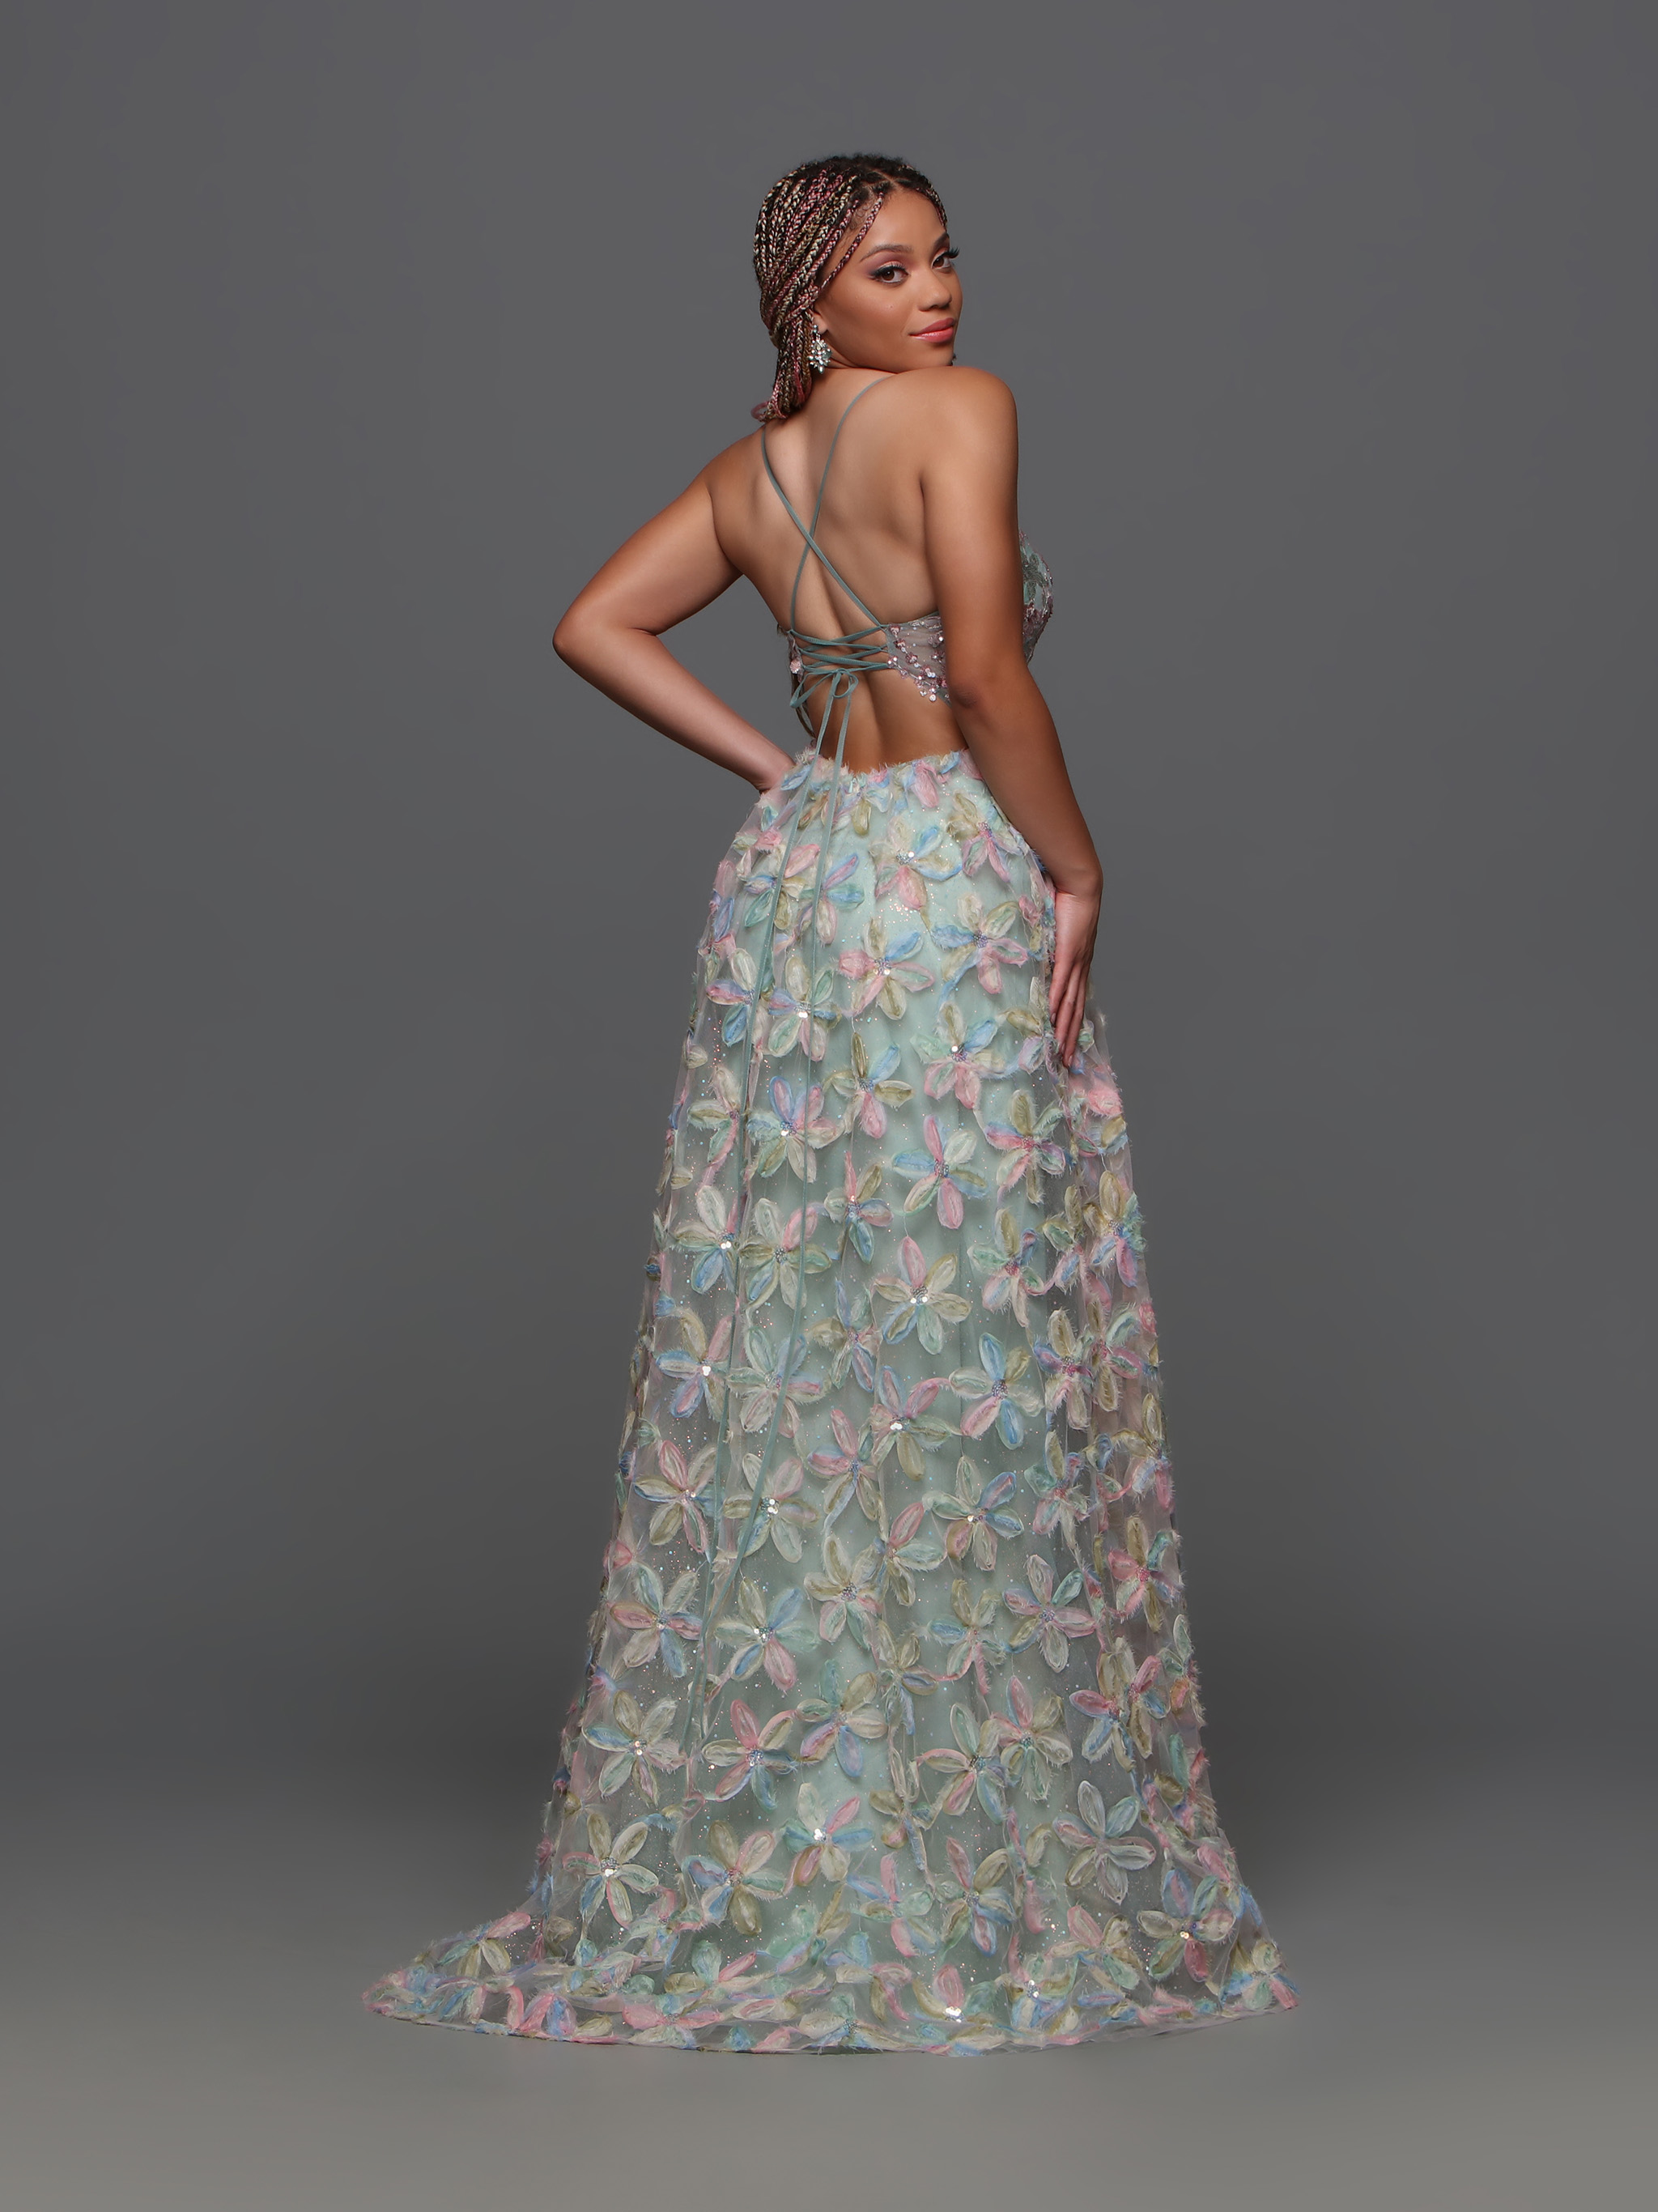 Image showing back view of style #72324